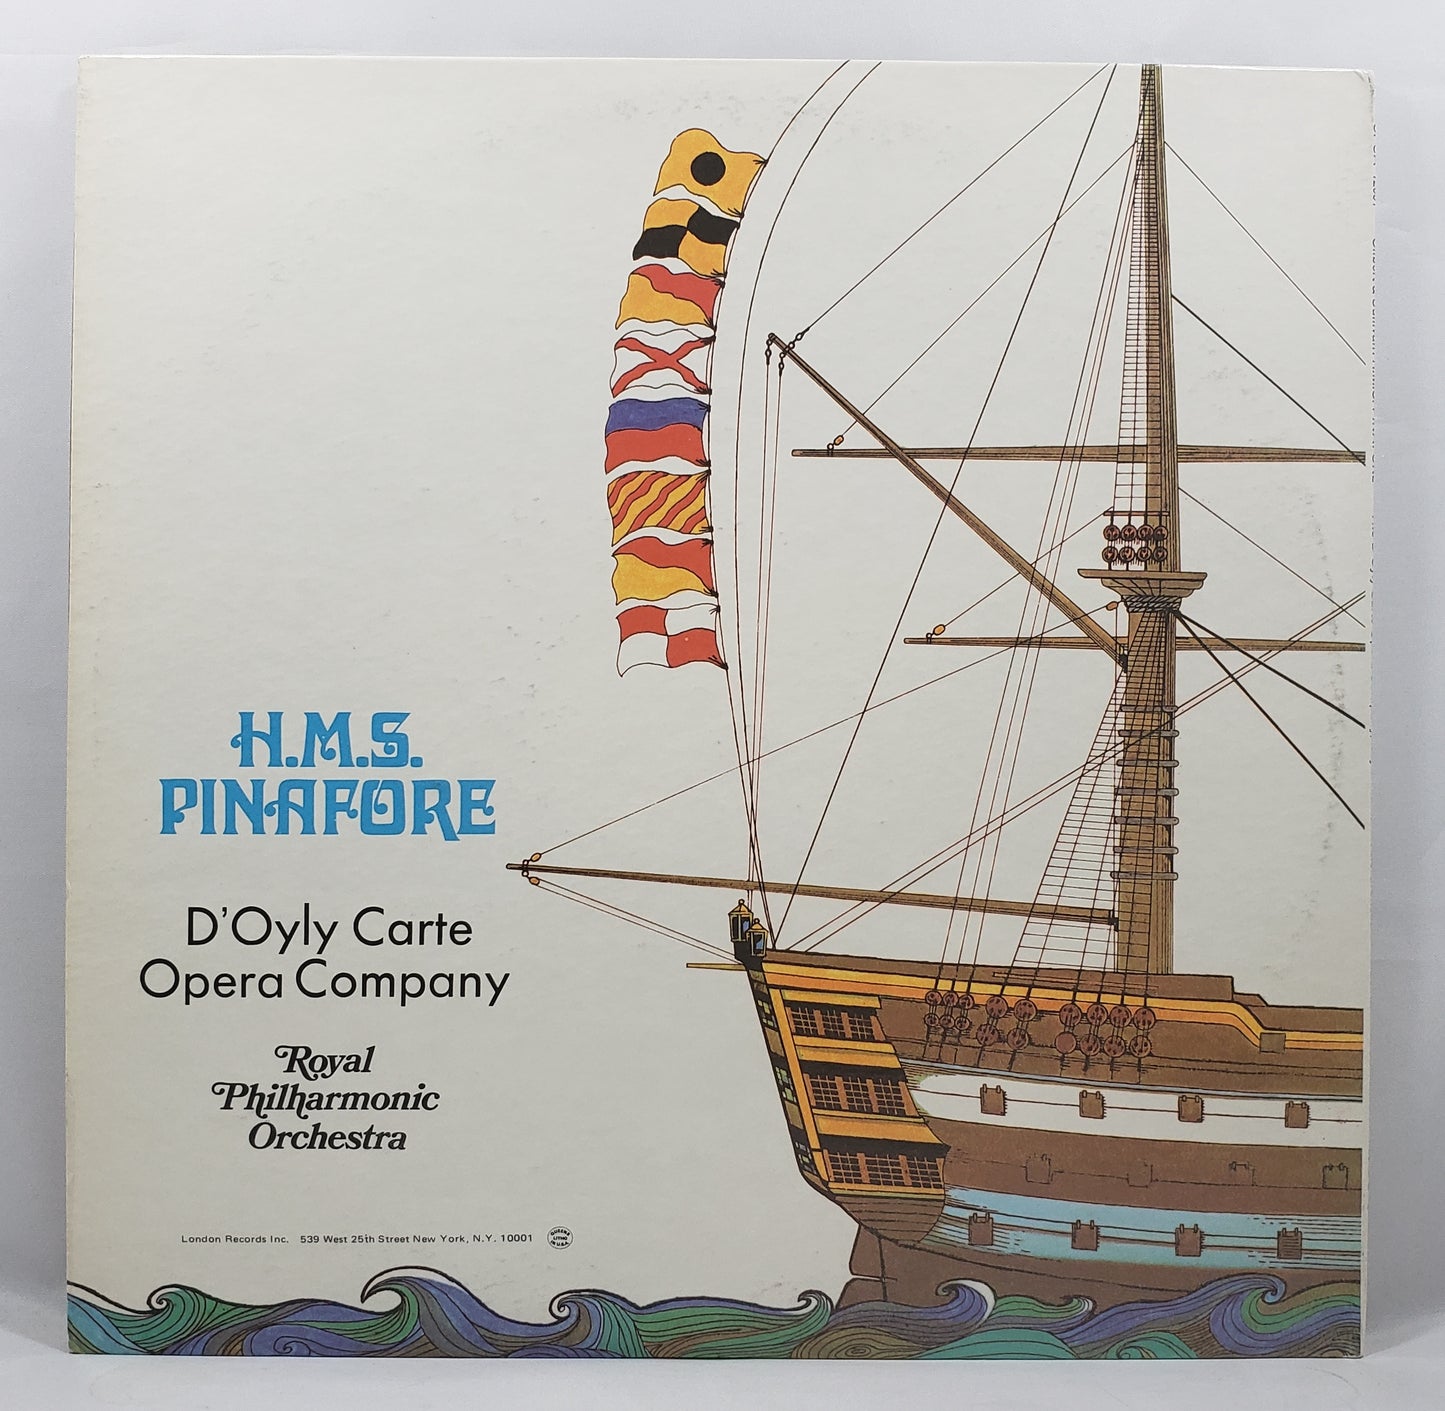 Gilbert & Sullivan - H.M.S. Pinafore [1971 Phase 4] [Used Double Vinyl Record]